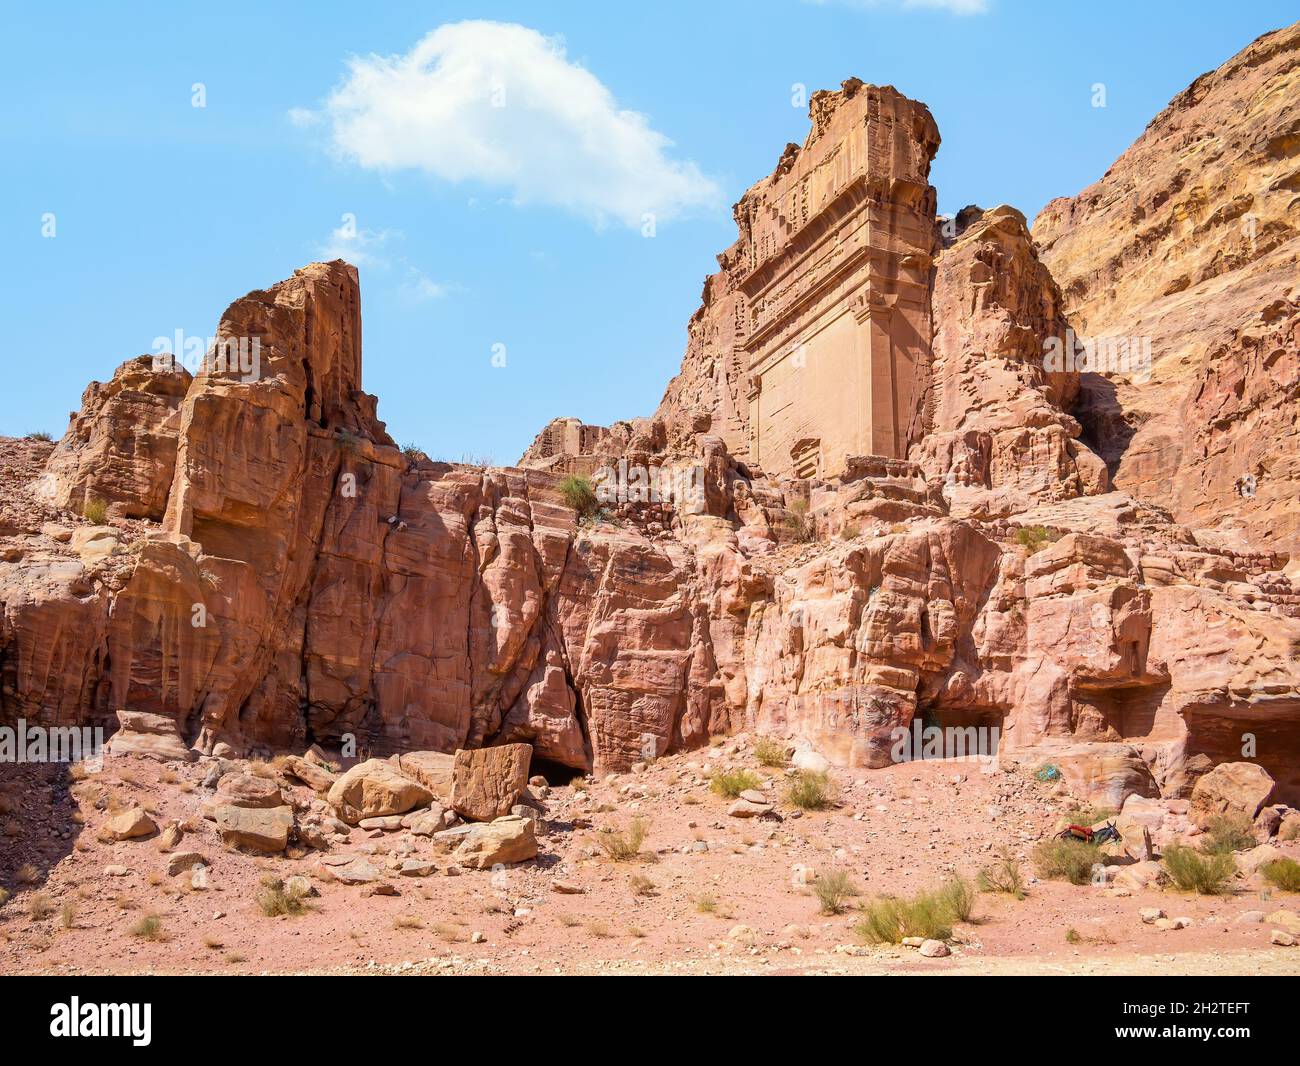 Tomb of 'Unayshu a well preserved tomb carved in red rock in the ancient city of Petra, Jordan Stock Photo